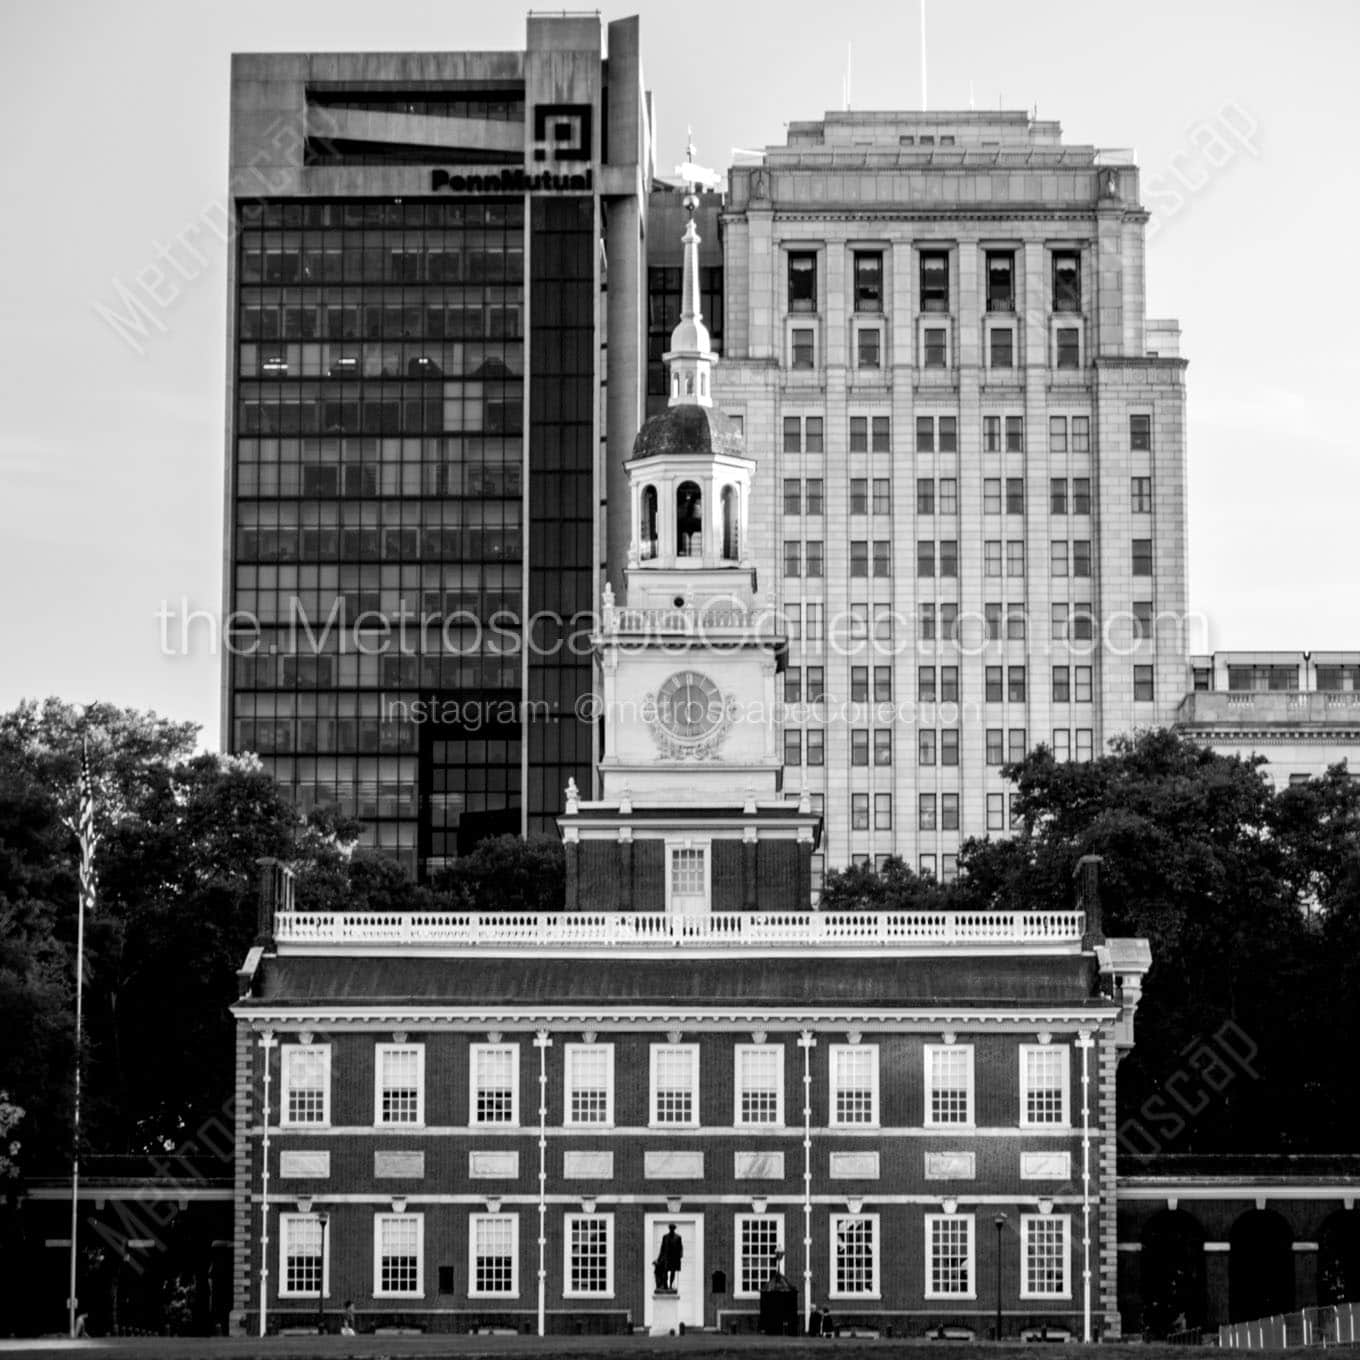 independence hall penn mutual building Black & White Office Art